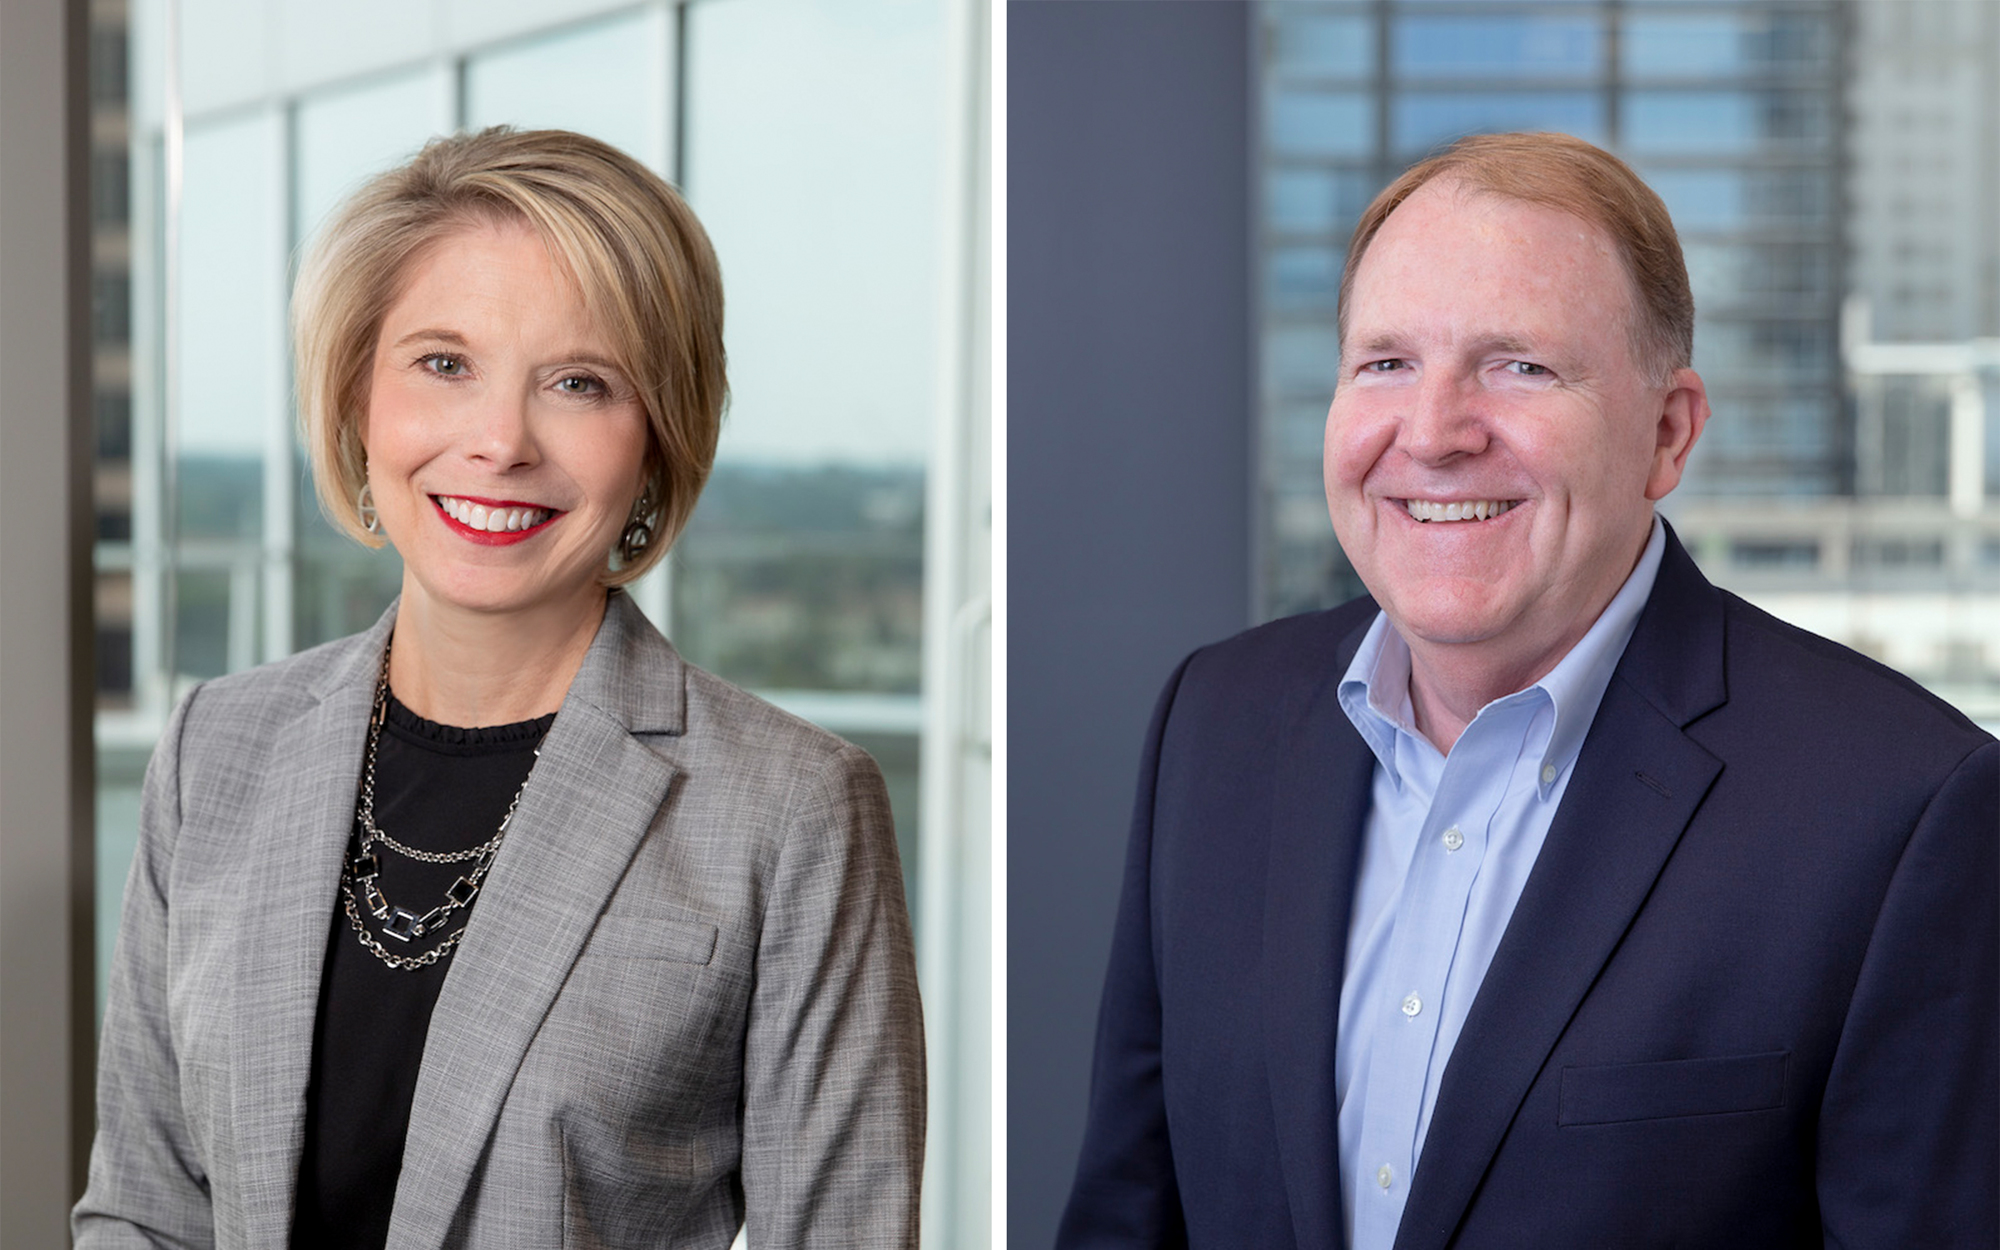 Michelle Richardson is the vice president for sales performance research at The Brooks Group. Russ Sharer is the director of strategic sales excellence at The Brooks Group. (Courtesy photos)